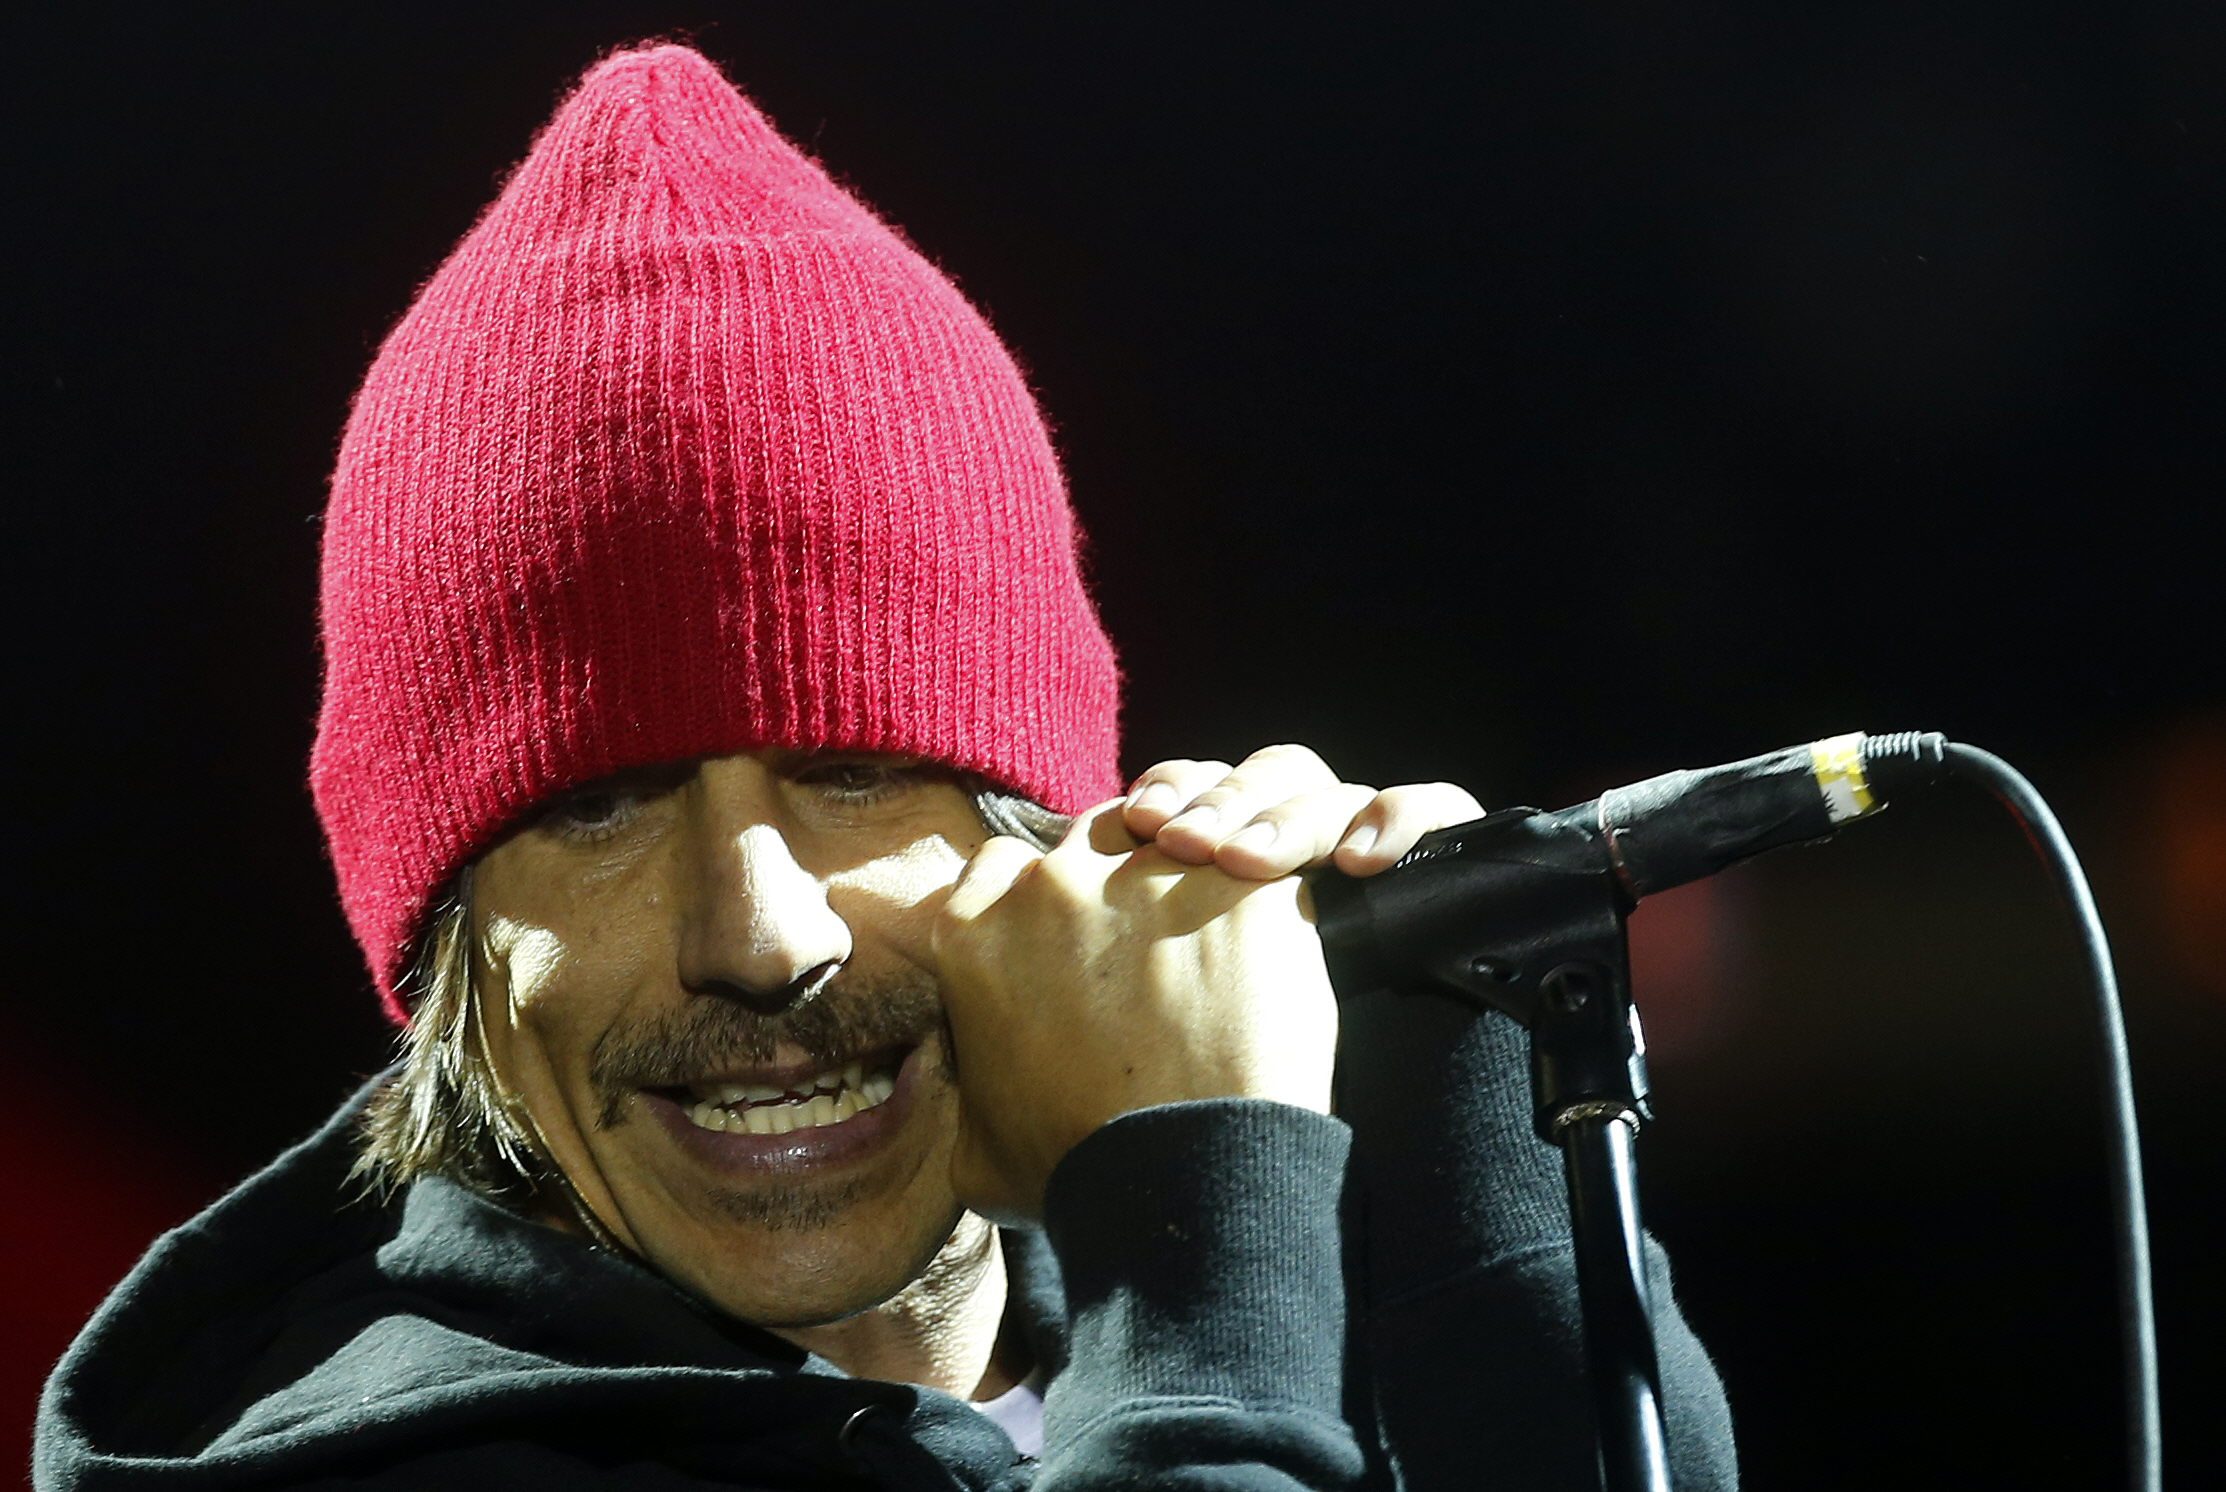 Red Hot Chili Peppers frontman Anthony Kiedis hospitalized, cancels shows